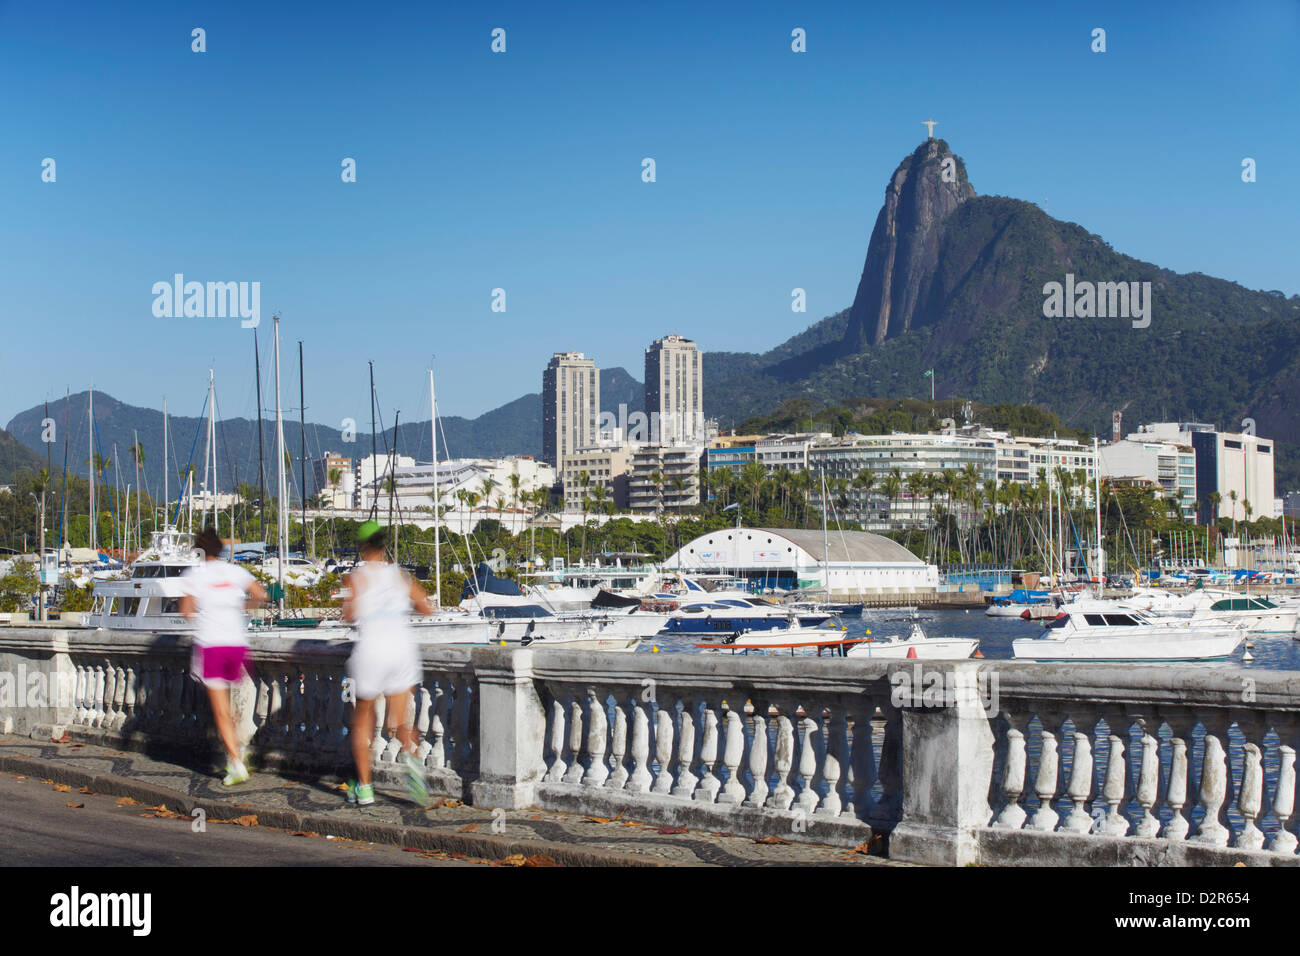 People jogging with Christ the Redeemer statue in background, Urca, Rio de Janeiro, Brazil, South America Stock Photo